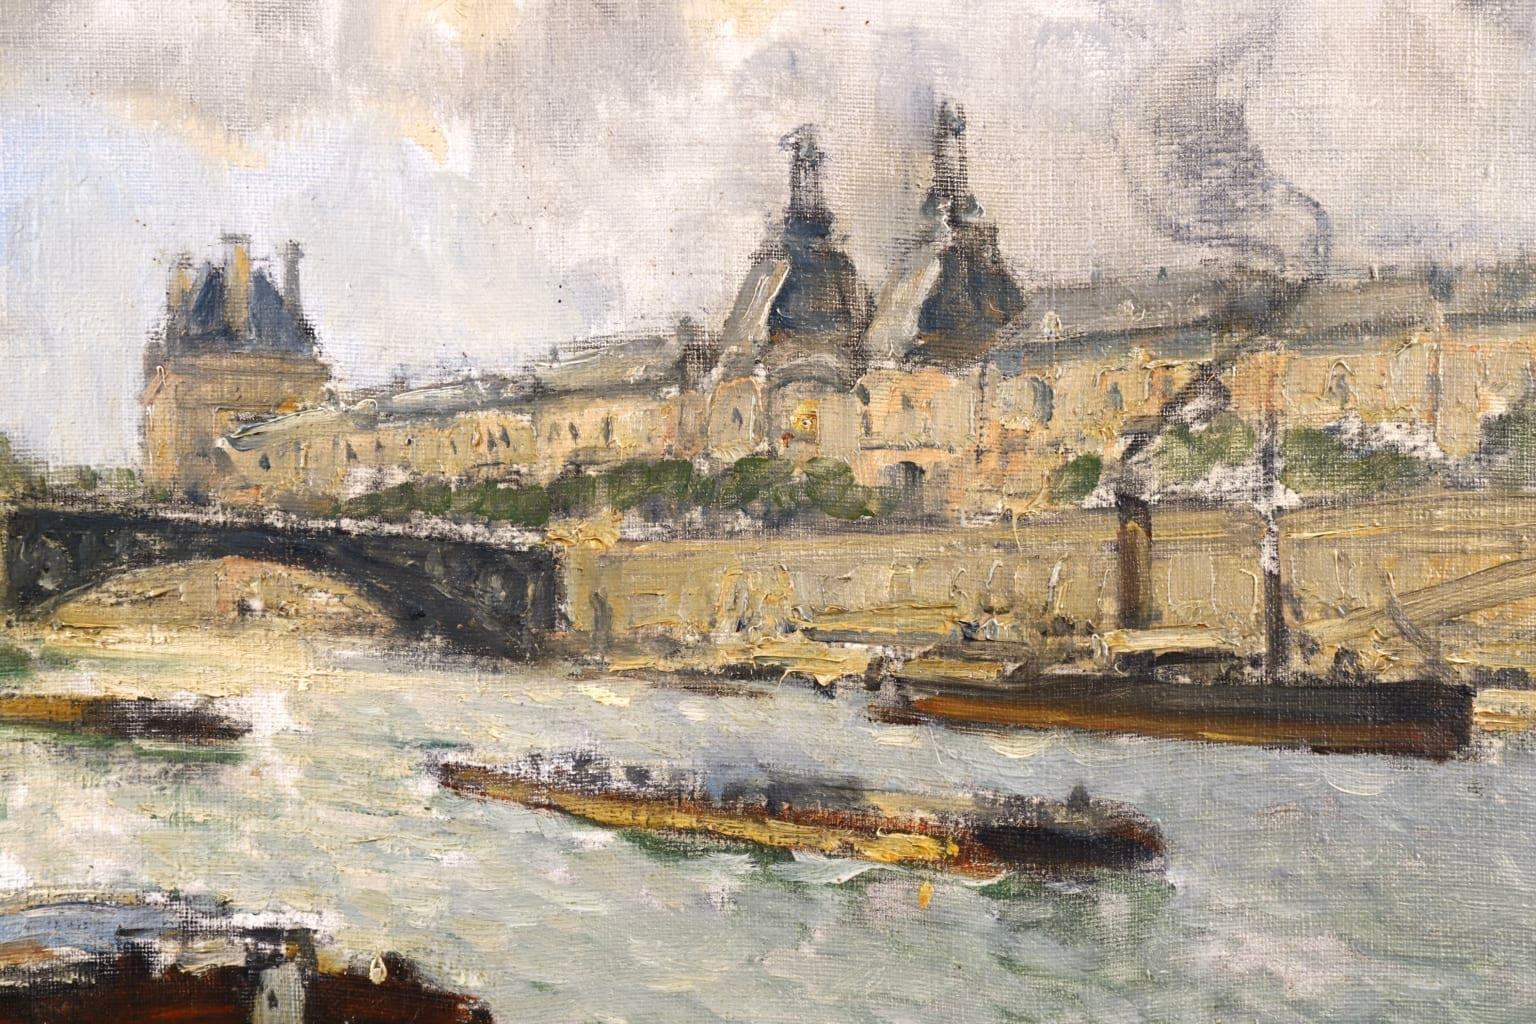 View of the Seine, Paris - Impressionist Oil, Riverscape by Frank Myers Boggs 4